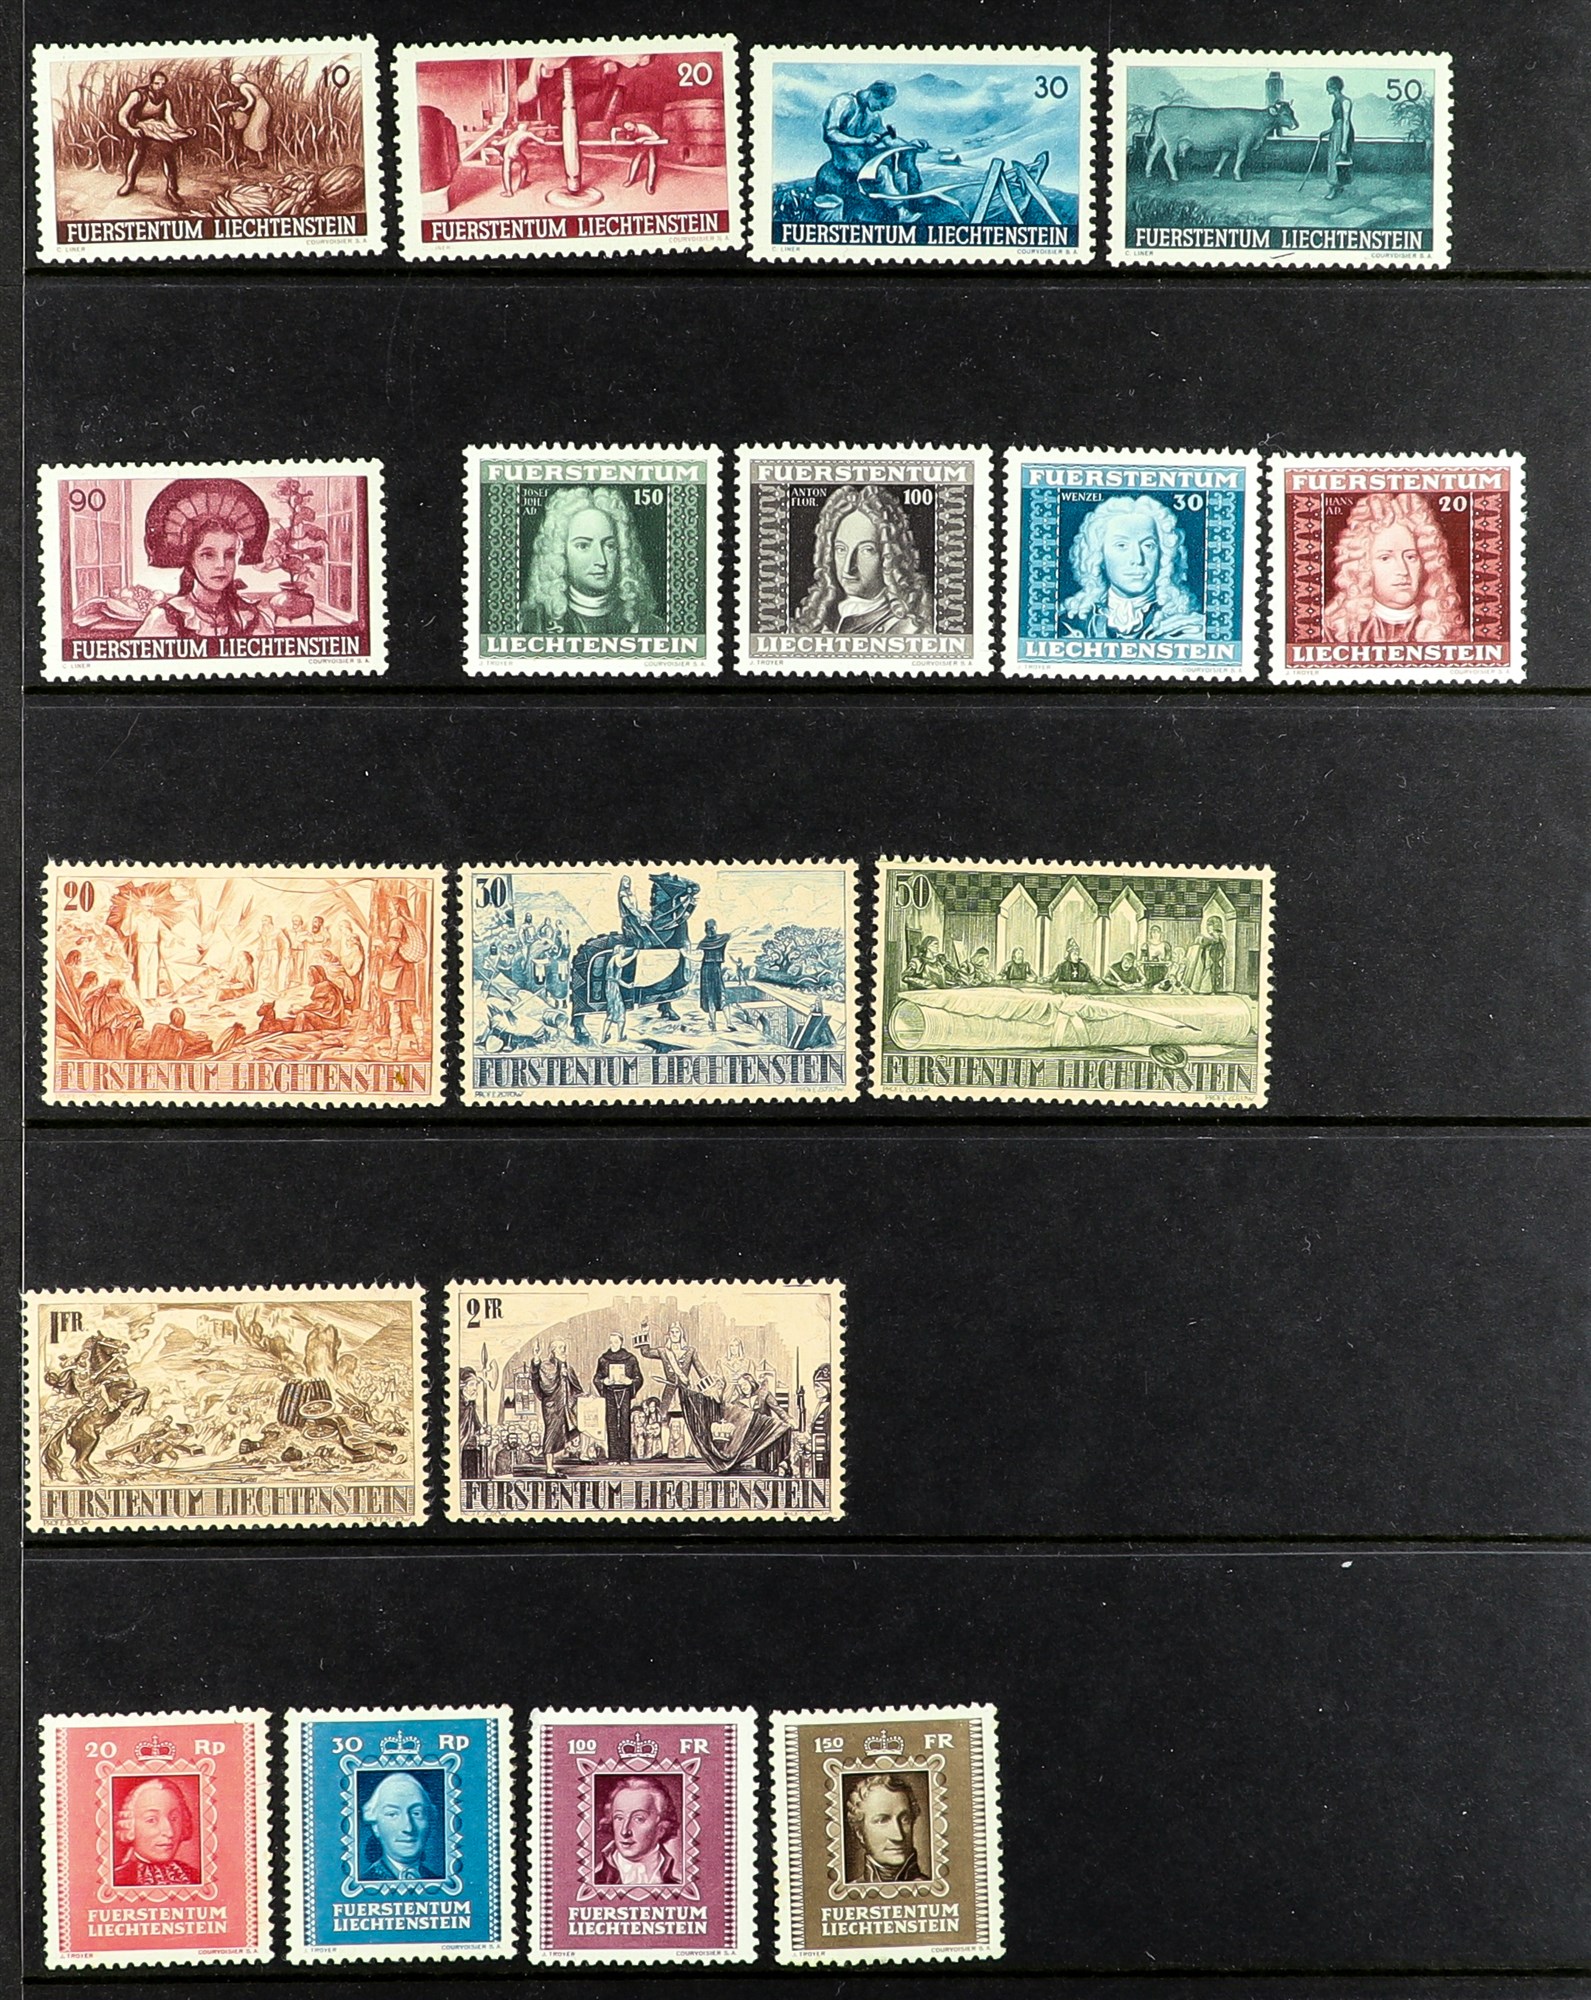 LIECHTENSTEIN 1938 - 1993 COLLECTION of 650+ never hinged mint stamps & 15 miniature sheets on - Image 2 of 11